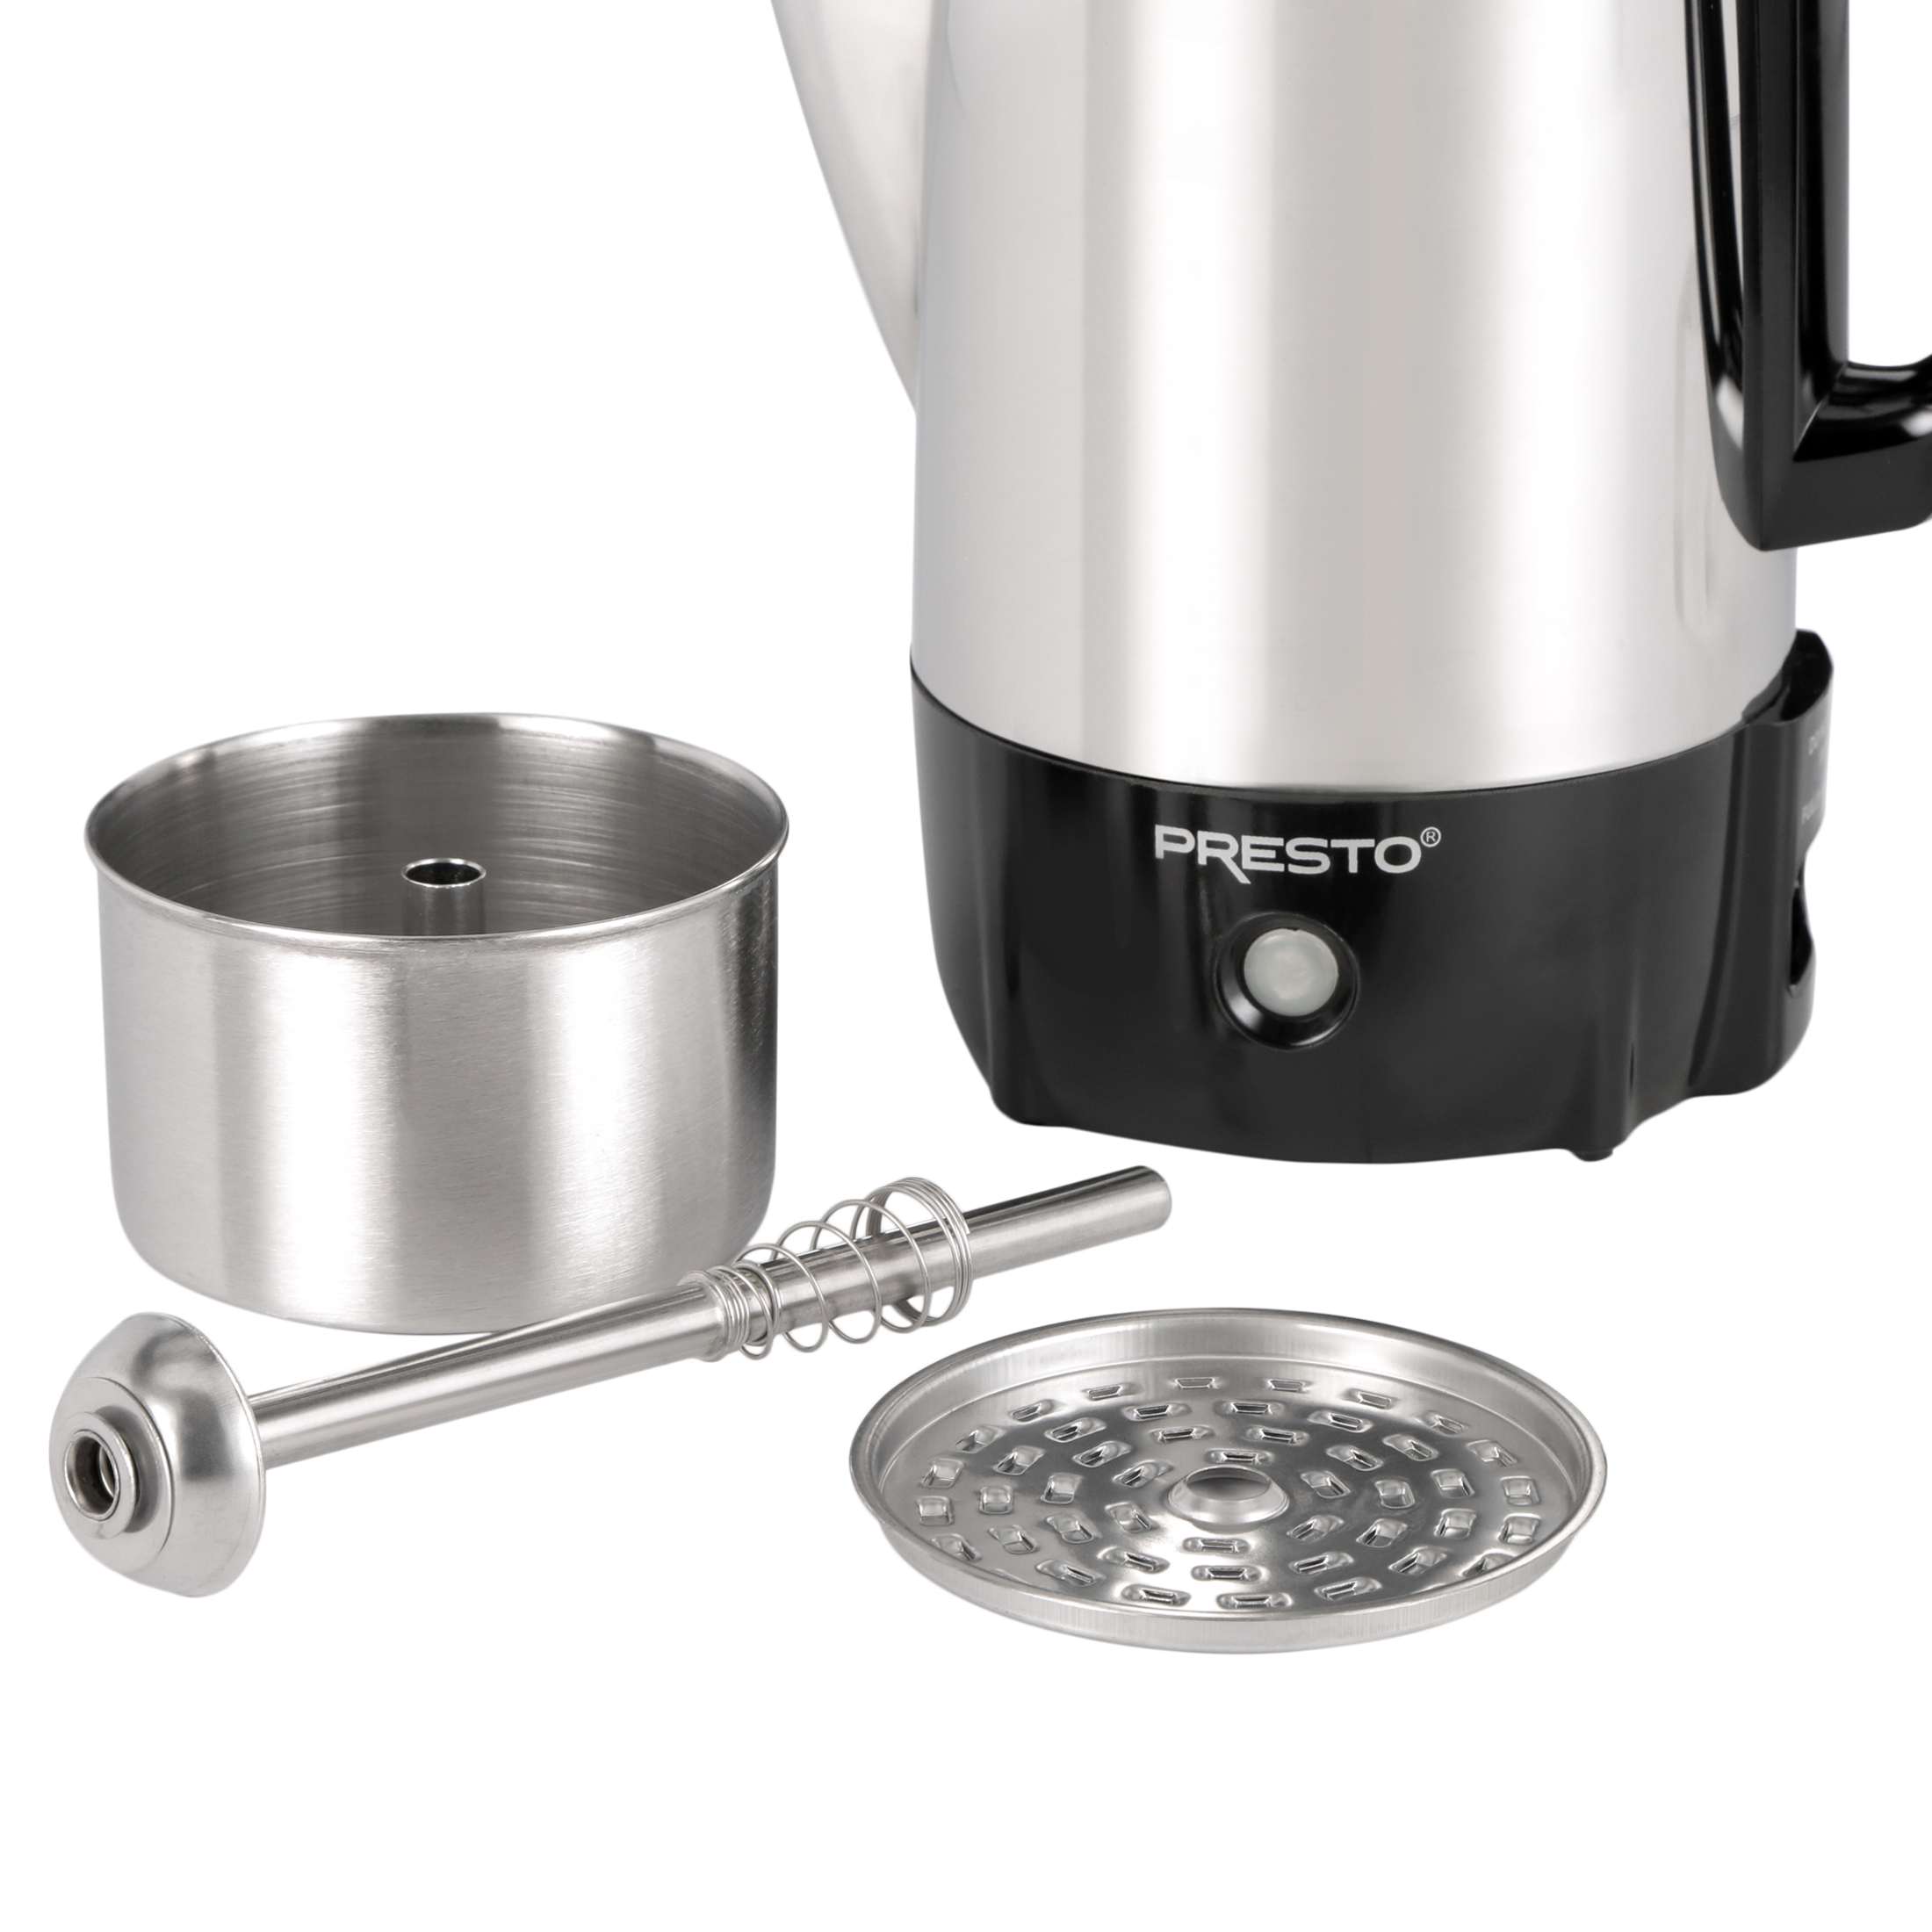 Presto® 6-Cup Capacity Stainless Steel Coffee Maker 02822 - image 7 of 10